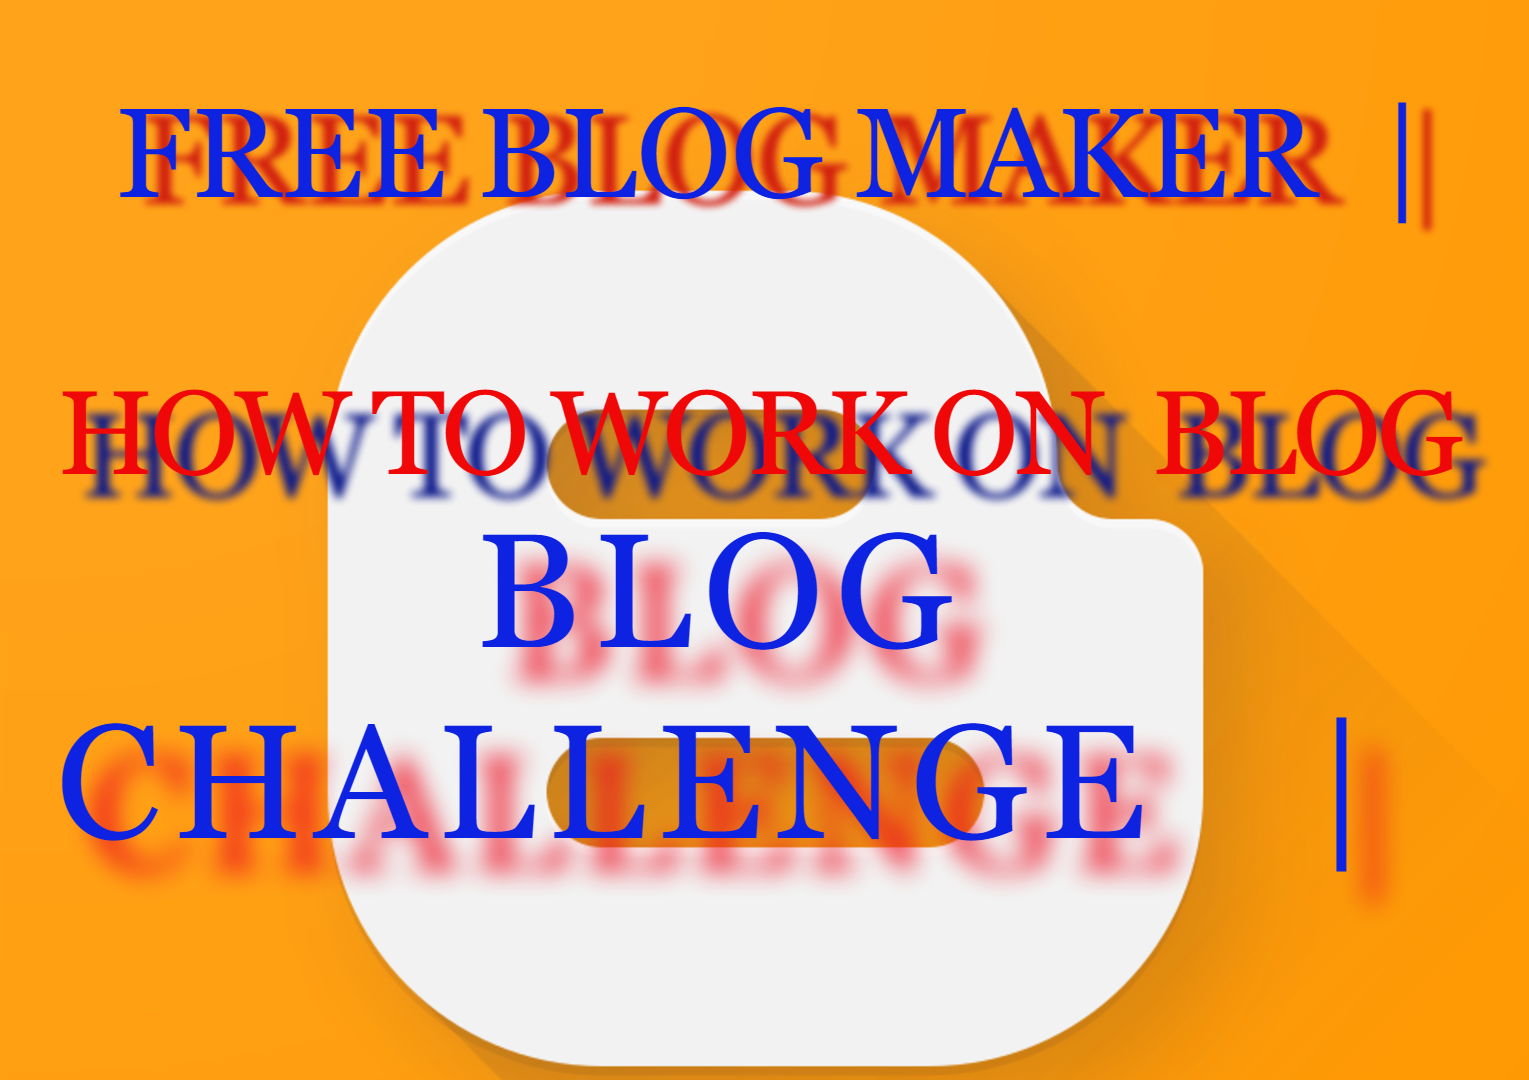 Create your own blog free, Free blog maker, Earn money from blog, Top 10 rules for success in Blogging, How to work on blog?